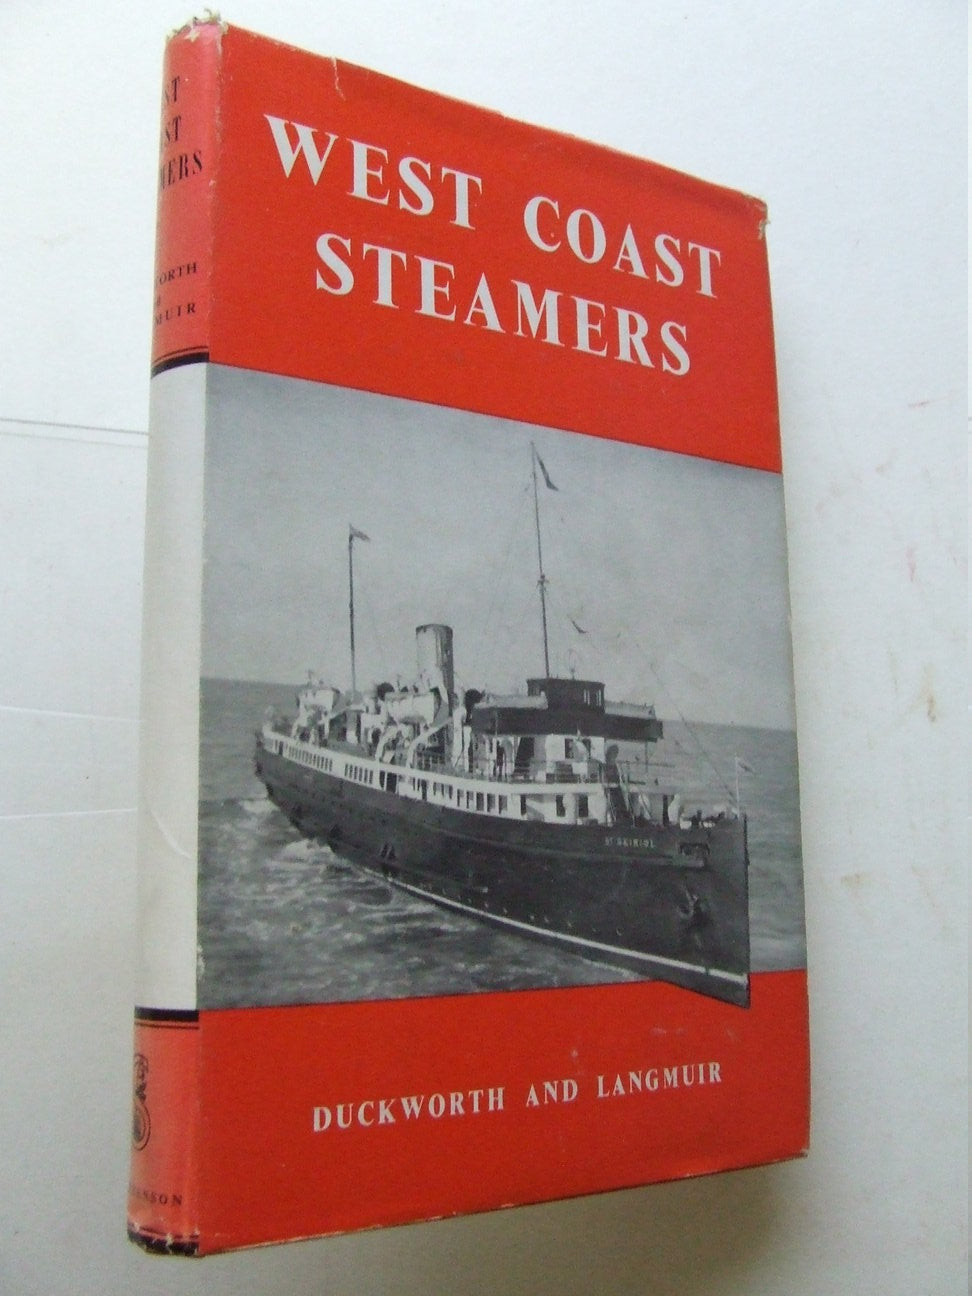 West Coast Steamers. 2nd edition